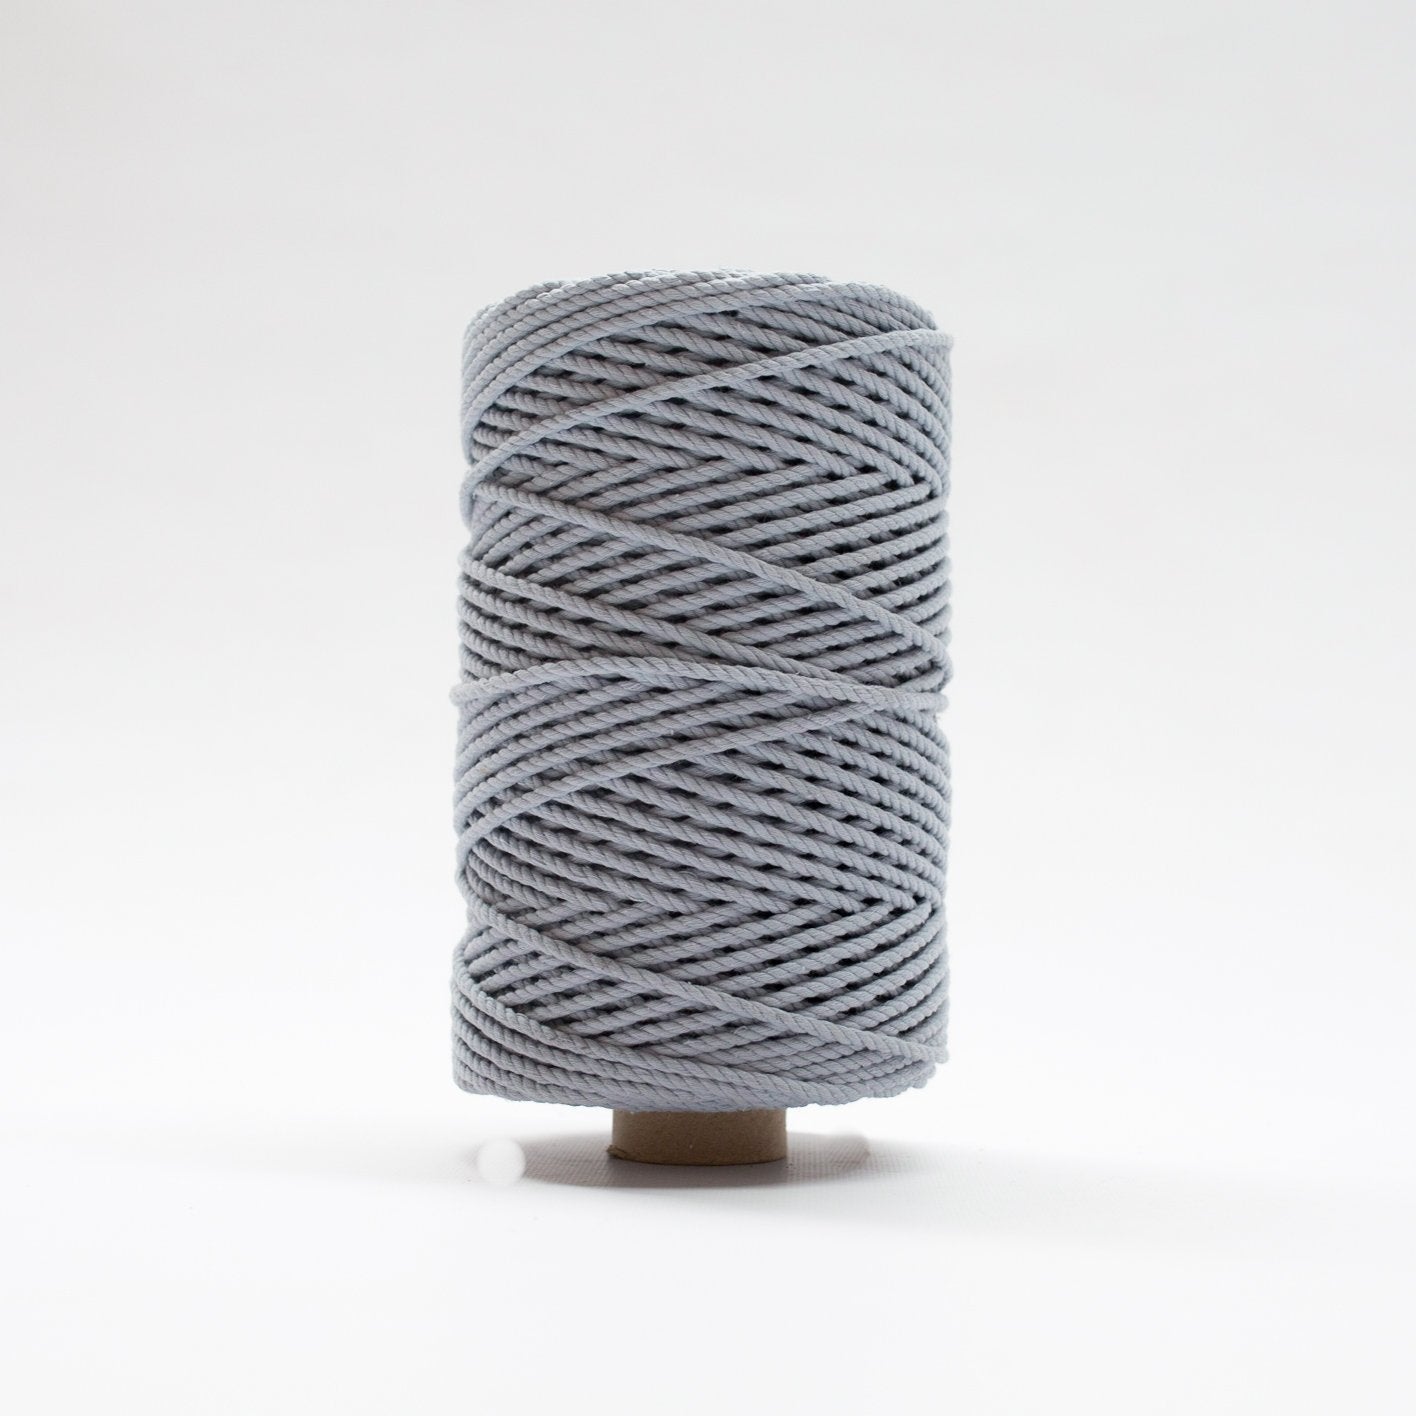 Mary Maker Studio Luxe Colour Cotton 4mm 1KG Recycled Luxe Macrame Rope // Nimbus Blue macrame cotton macrame rope macrame workshop macrame patterns macrame